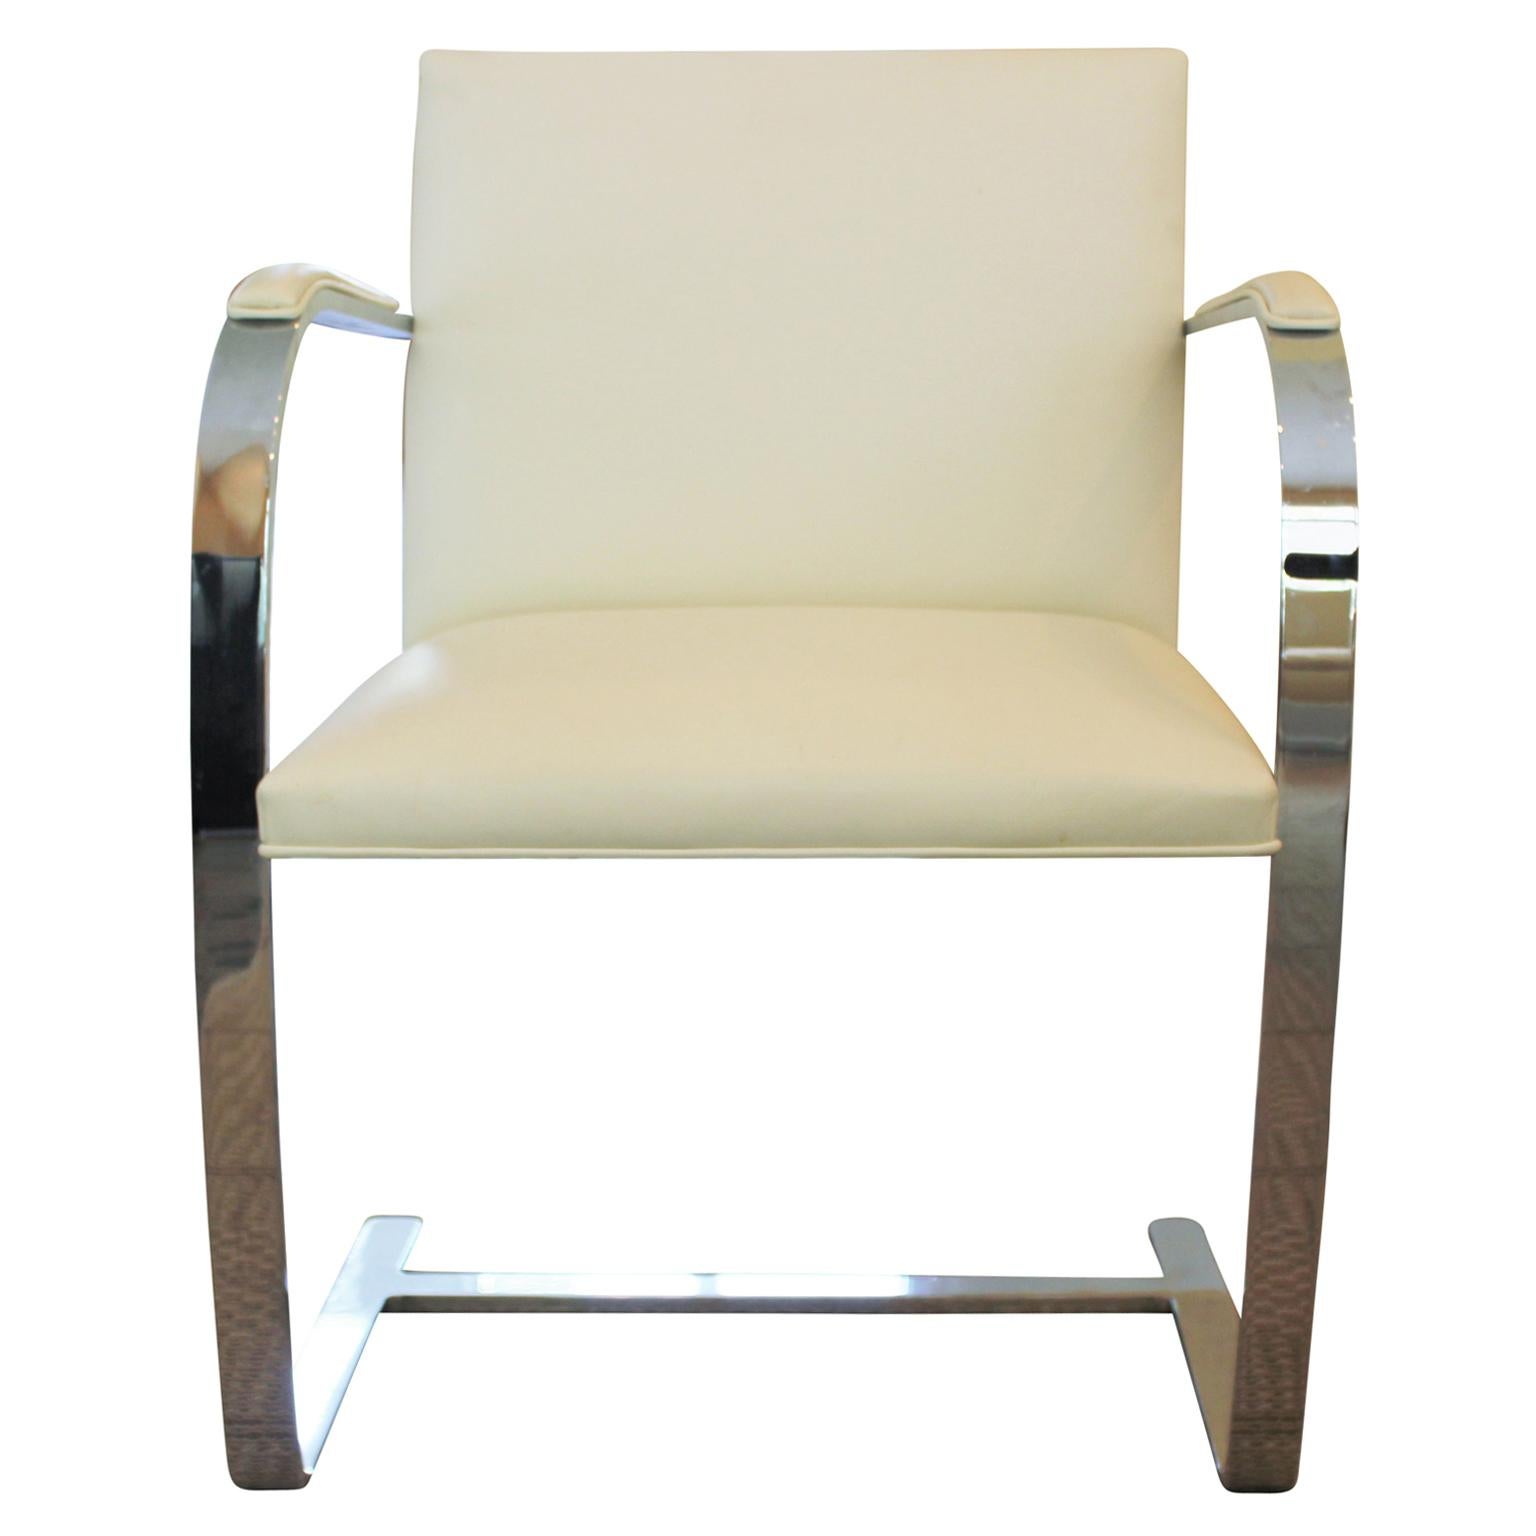 20th Century 8 Knoll Chrome and White Leather Modern Chairs